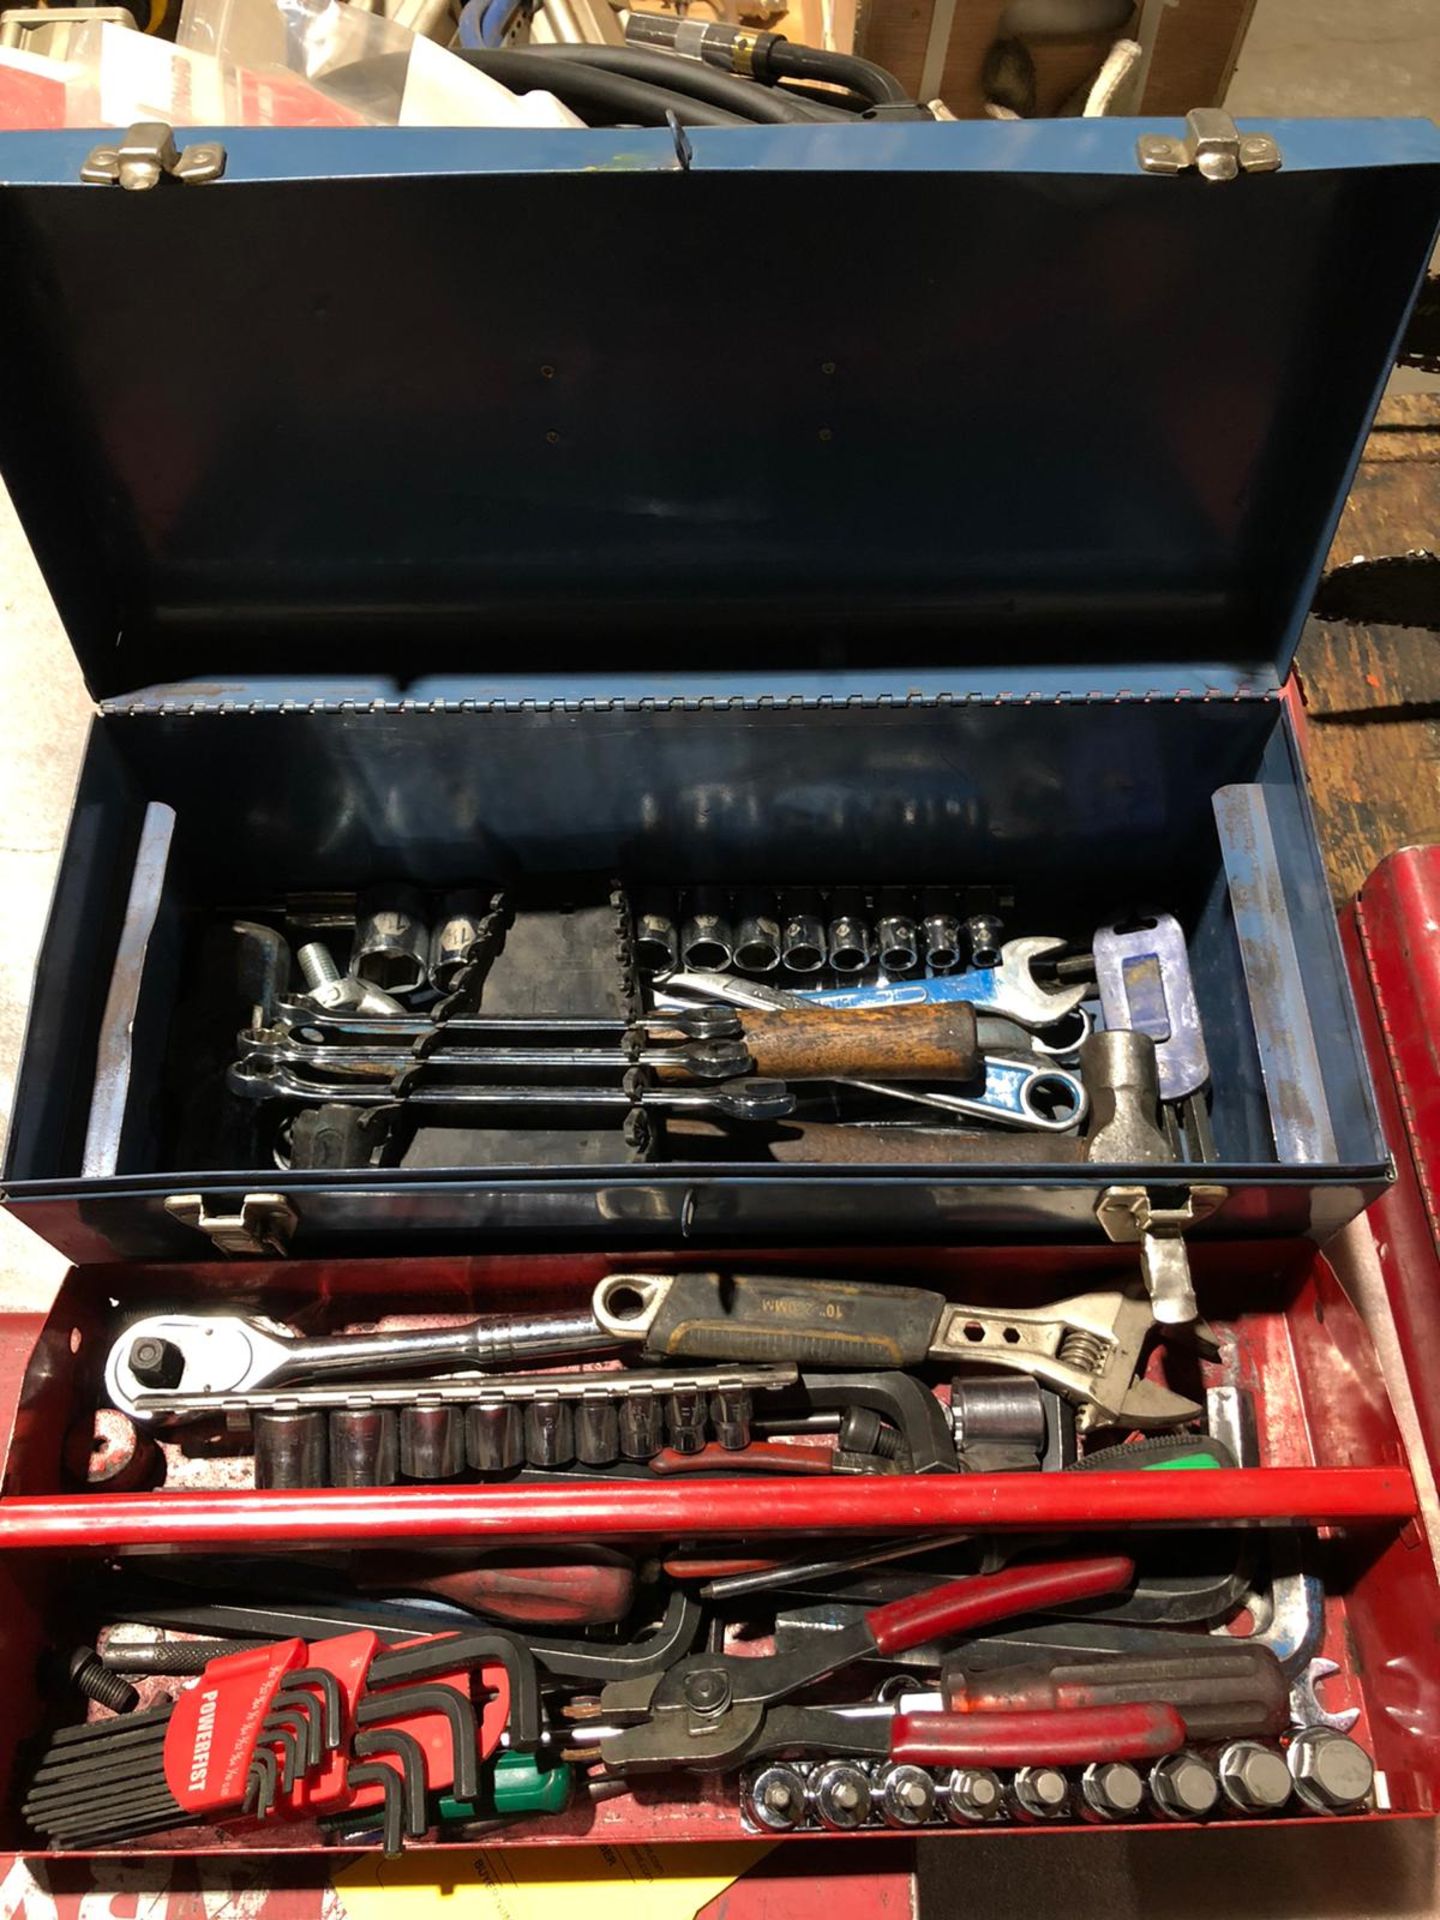 Beach Toolbox with Wrenches Allen Keys Socket Sets Cutters and more